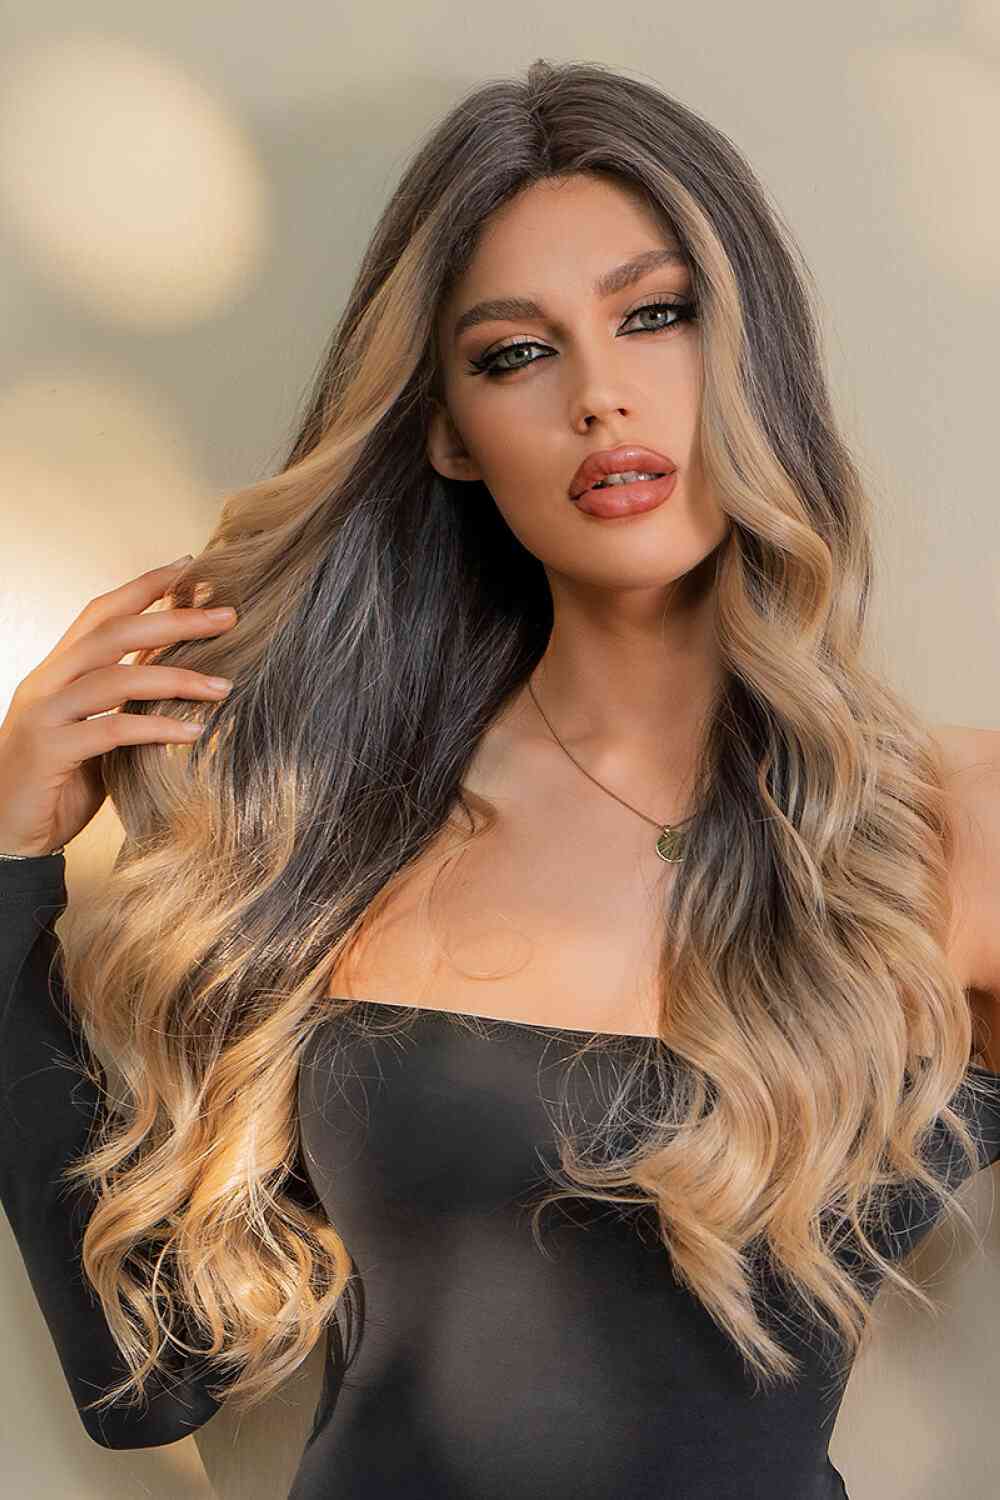 13*2" Lace Front Wigs Synthetic Long Wave 26" 150% Density Brown/Caramel Balayage One Size 